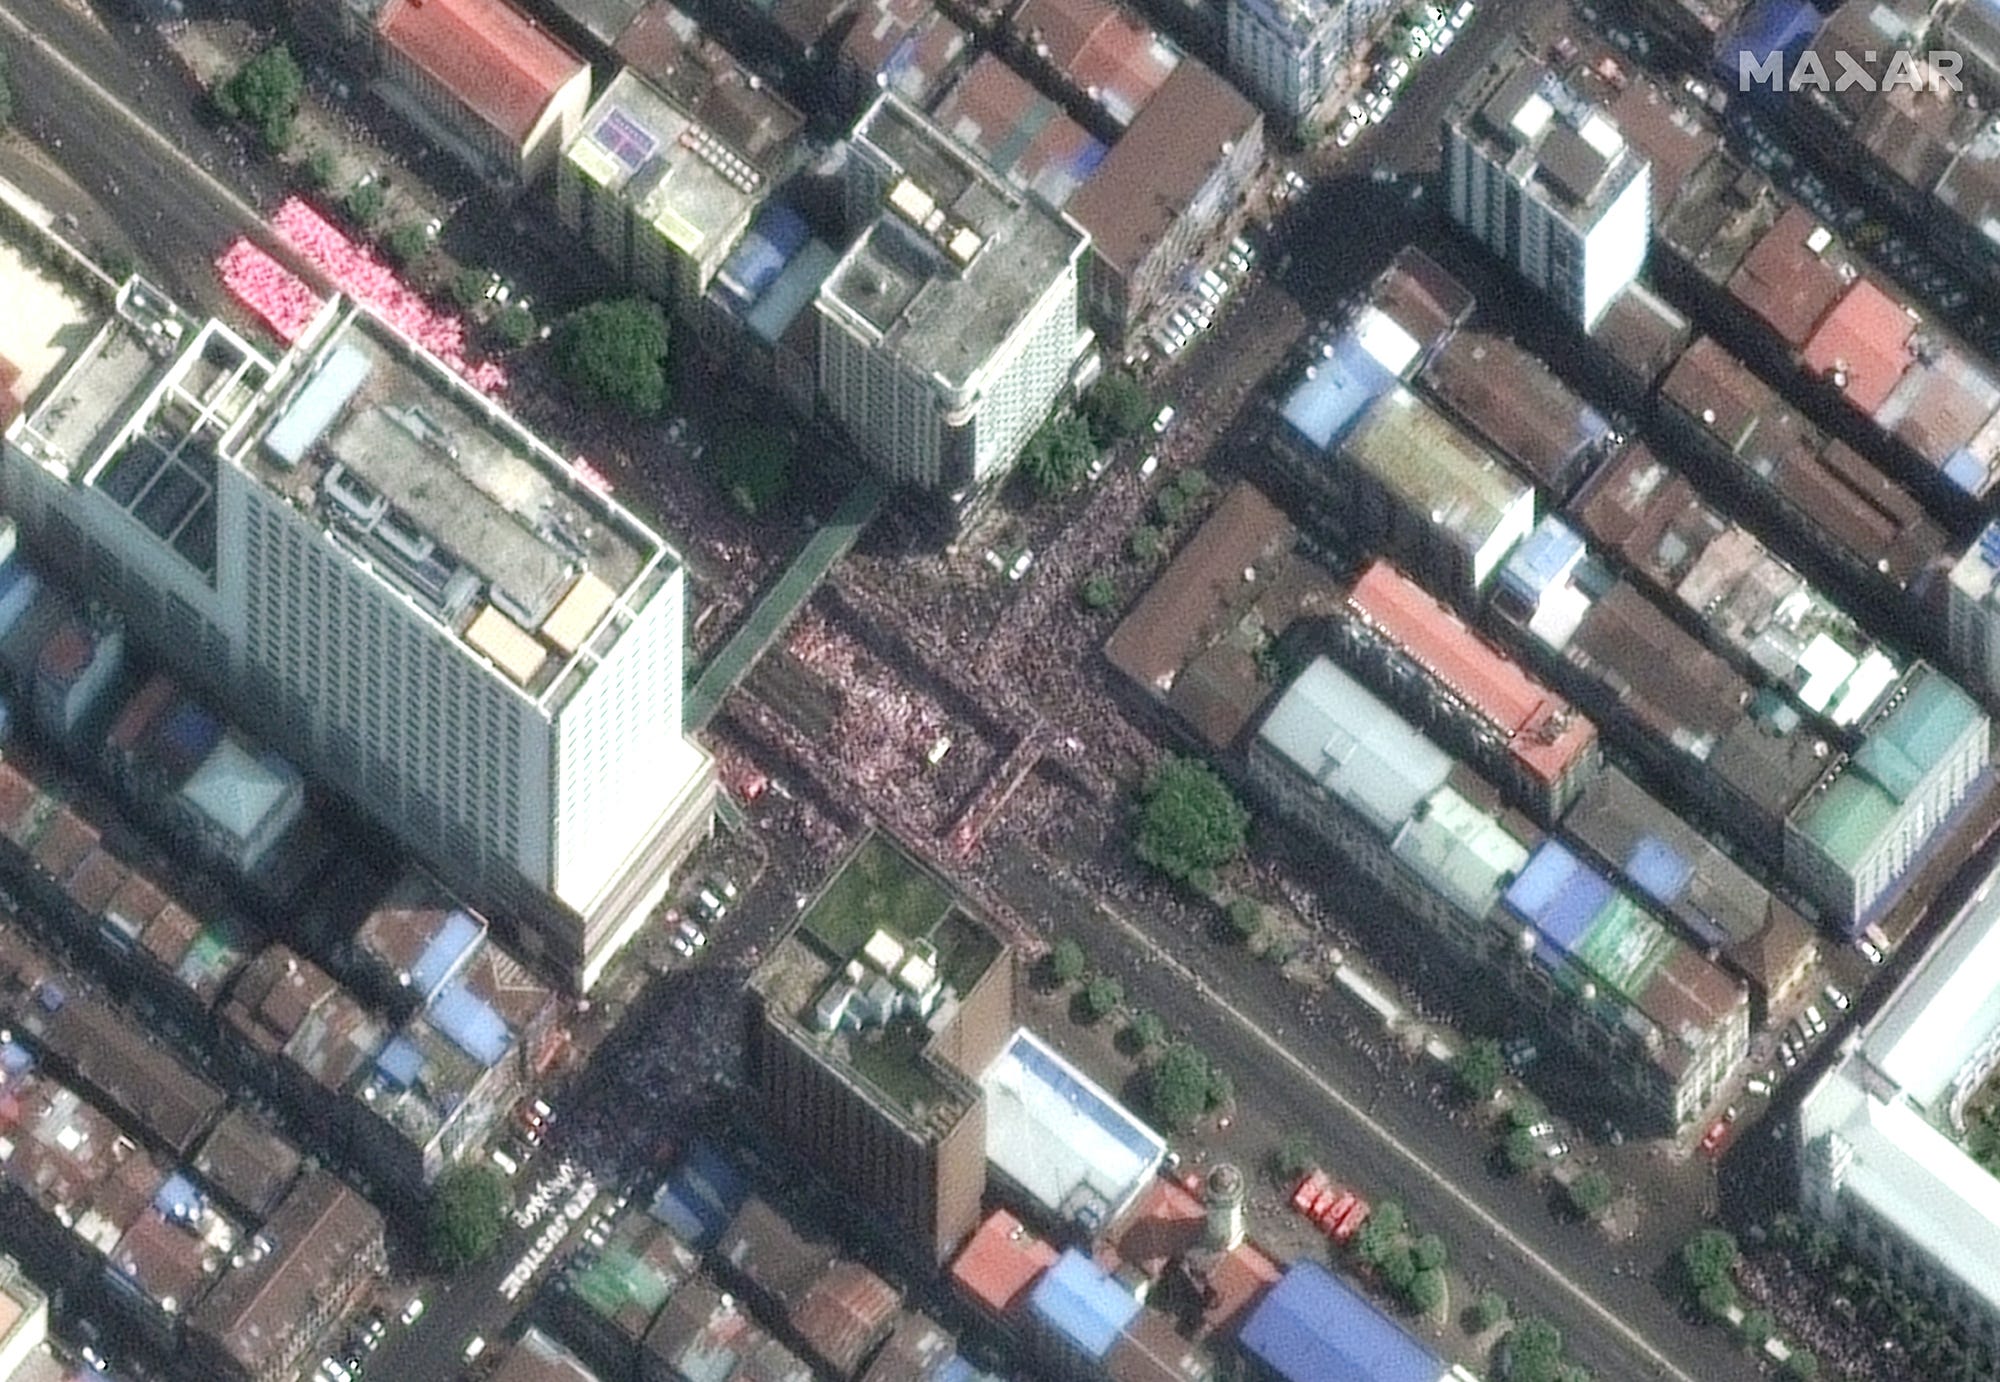 A large crowd of protesters gathered at Yangon’s Hledan junction.